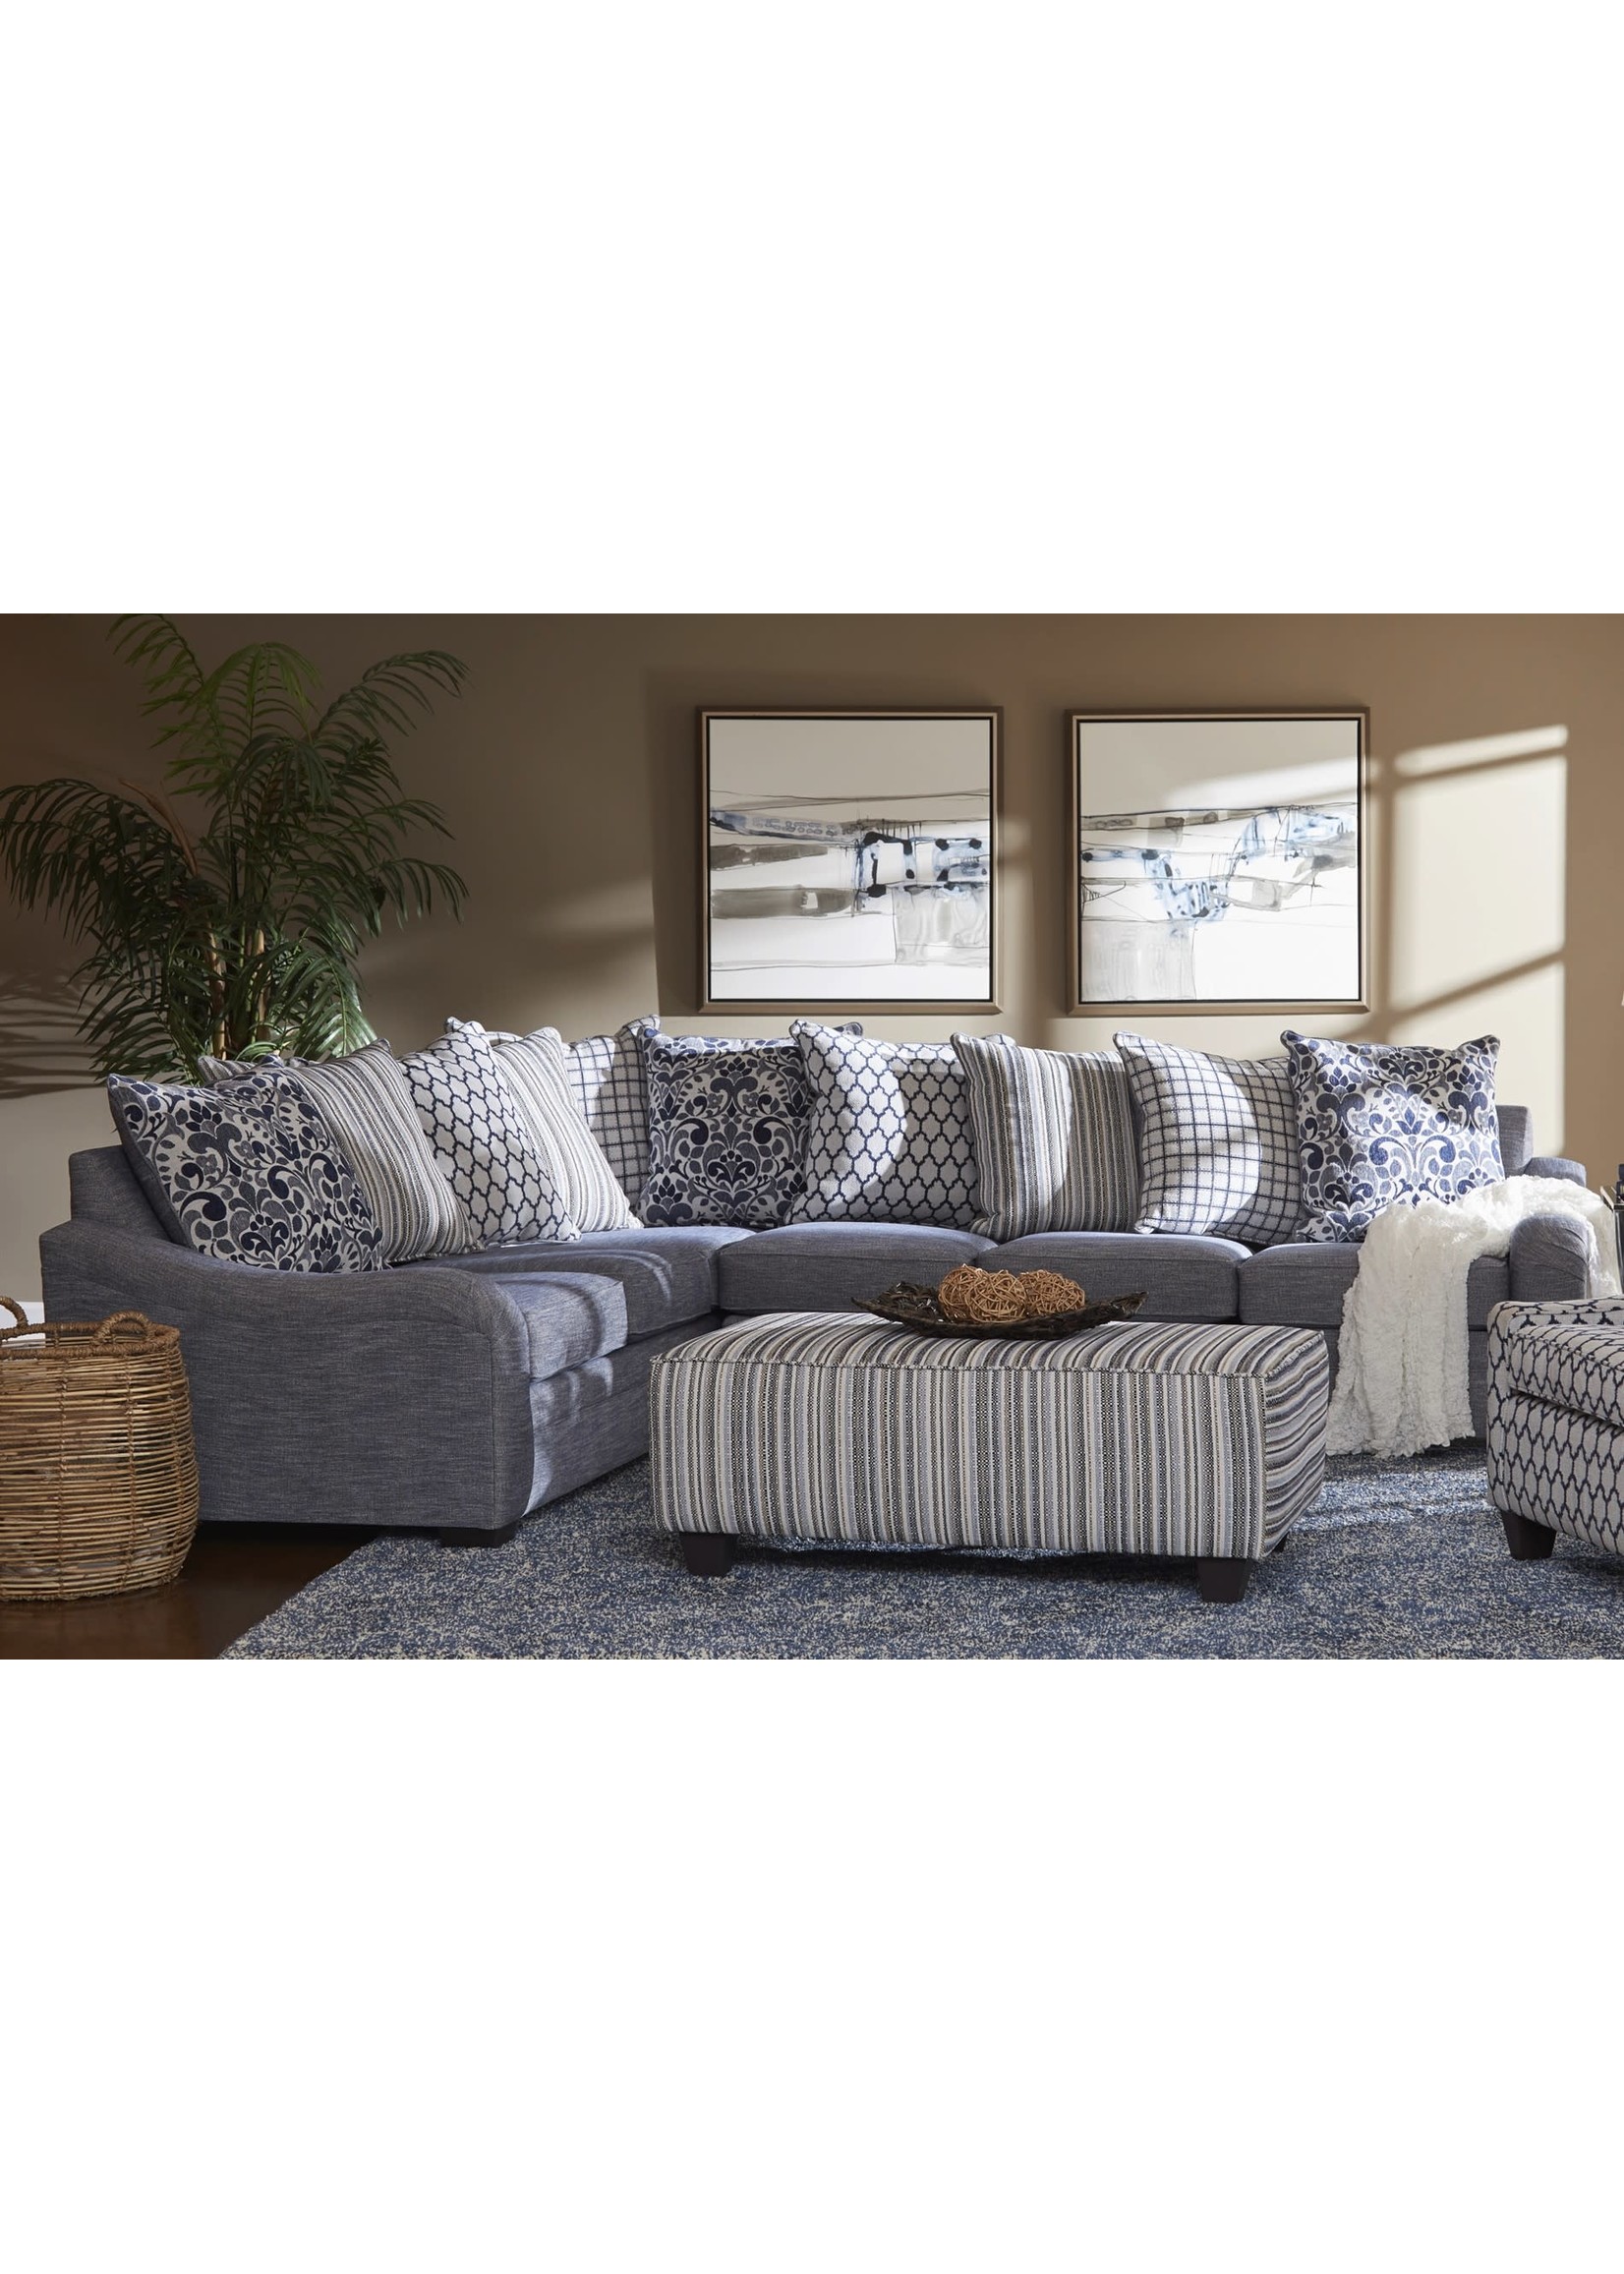 1903 TANGIER NAVY SECTIONAL